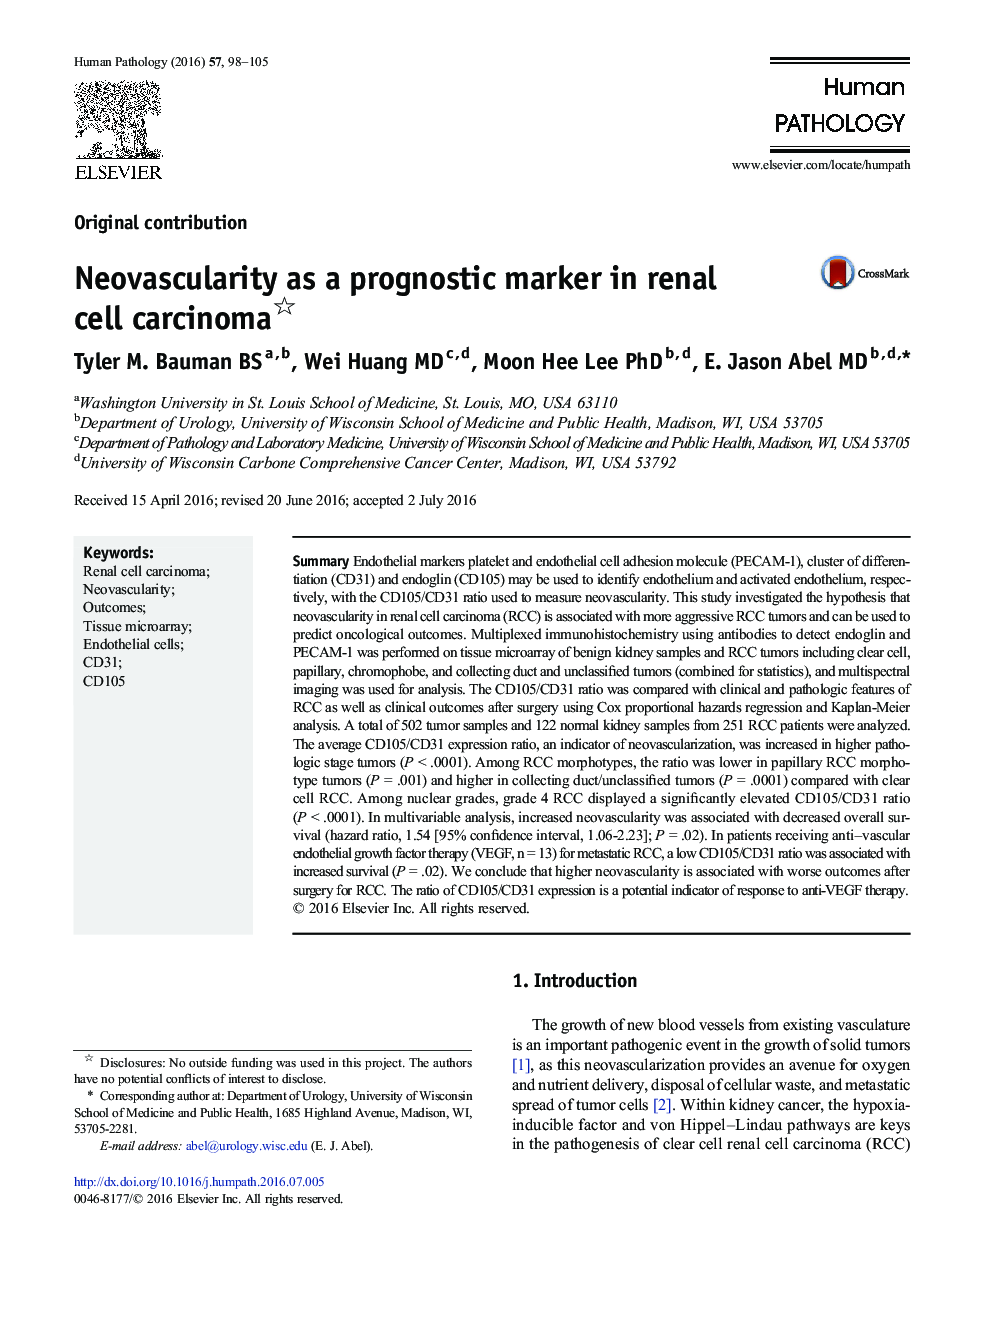 Neovascularity as a prognostic marker in renal cell carcinoma